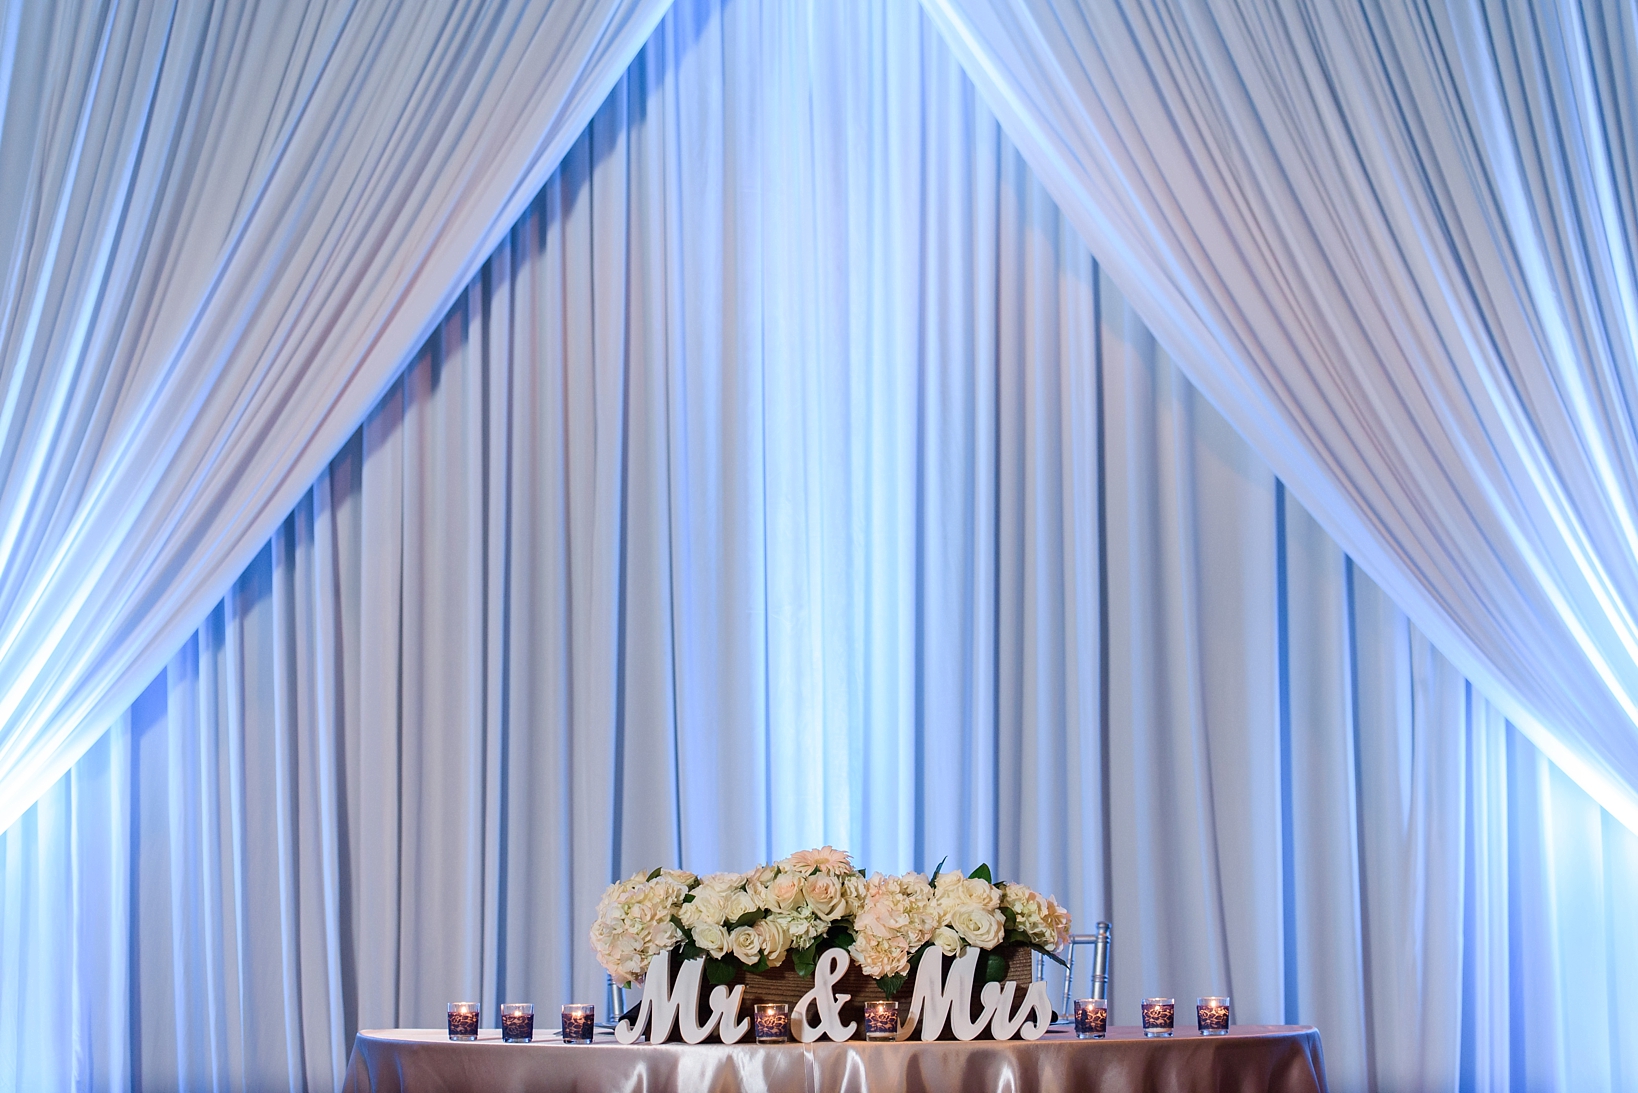 Sweetheart table peeks over the edge of the photo with blue up-lights adding personality to the drapery